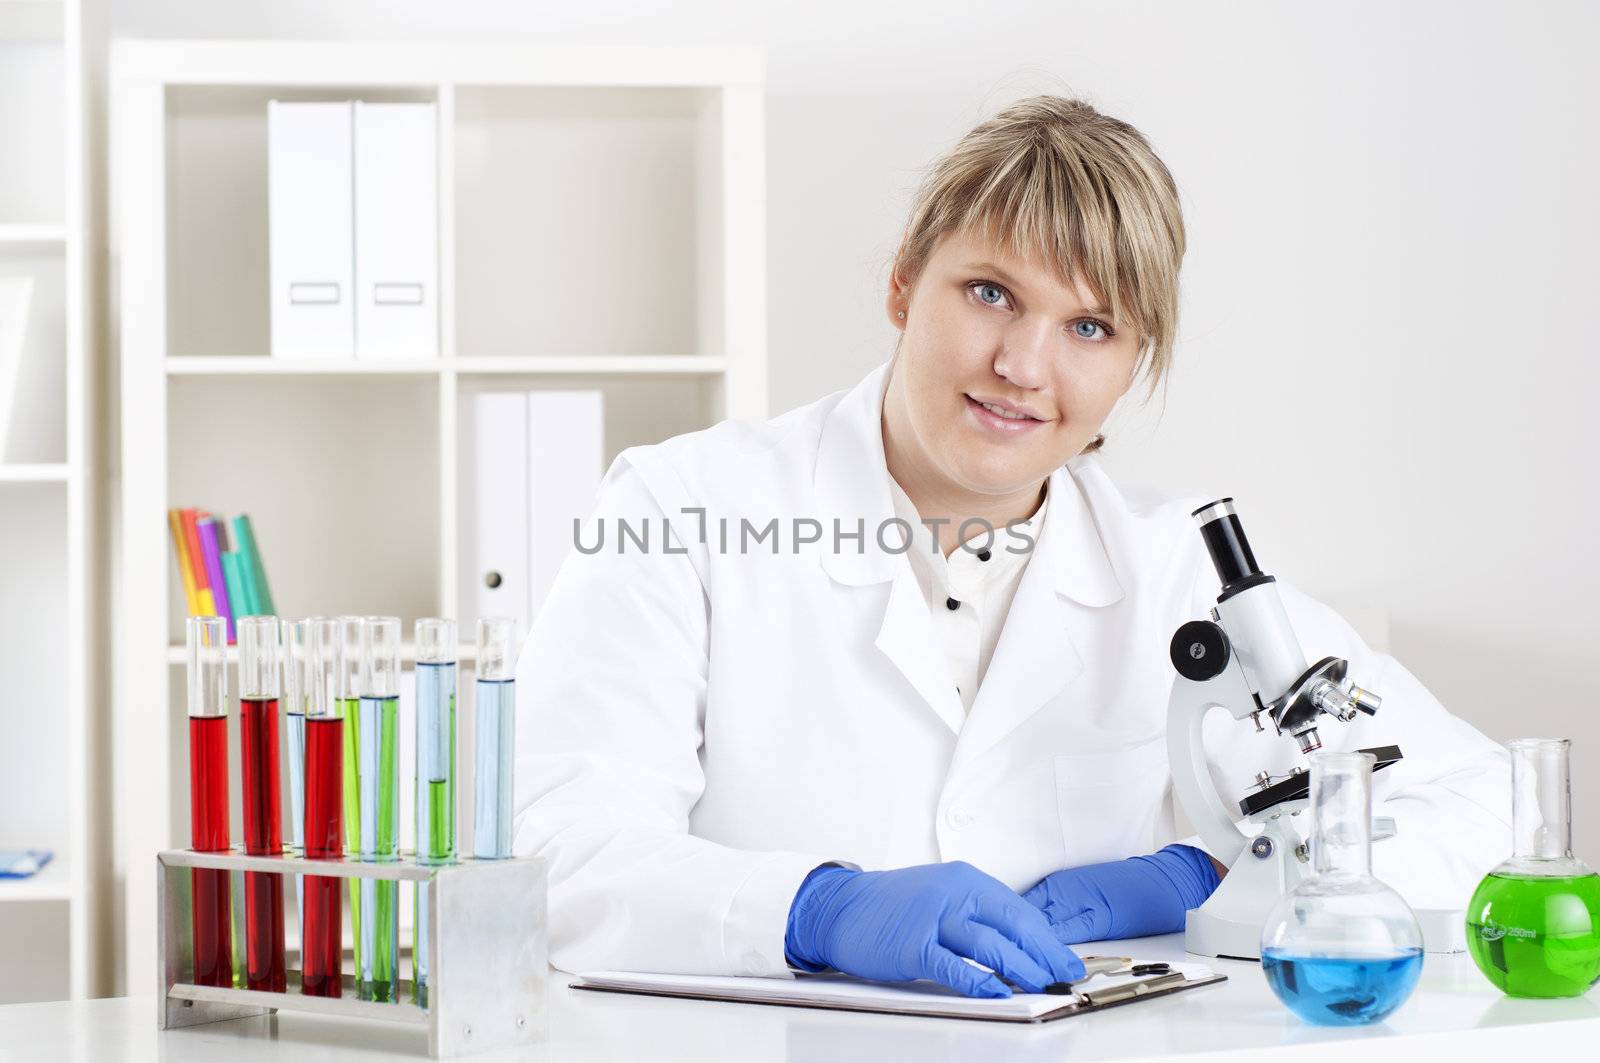 female doctor working in the lab, doing research